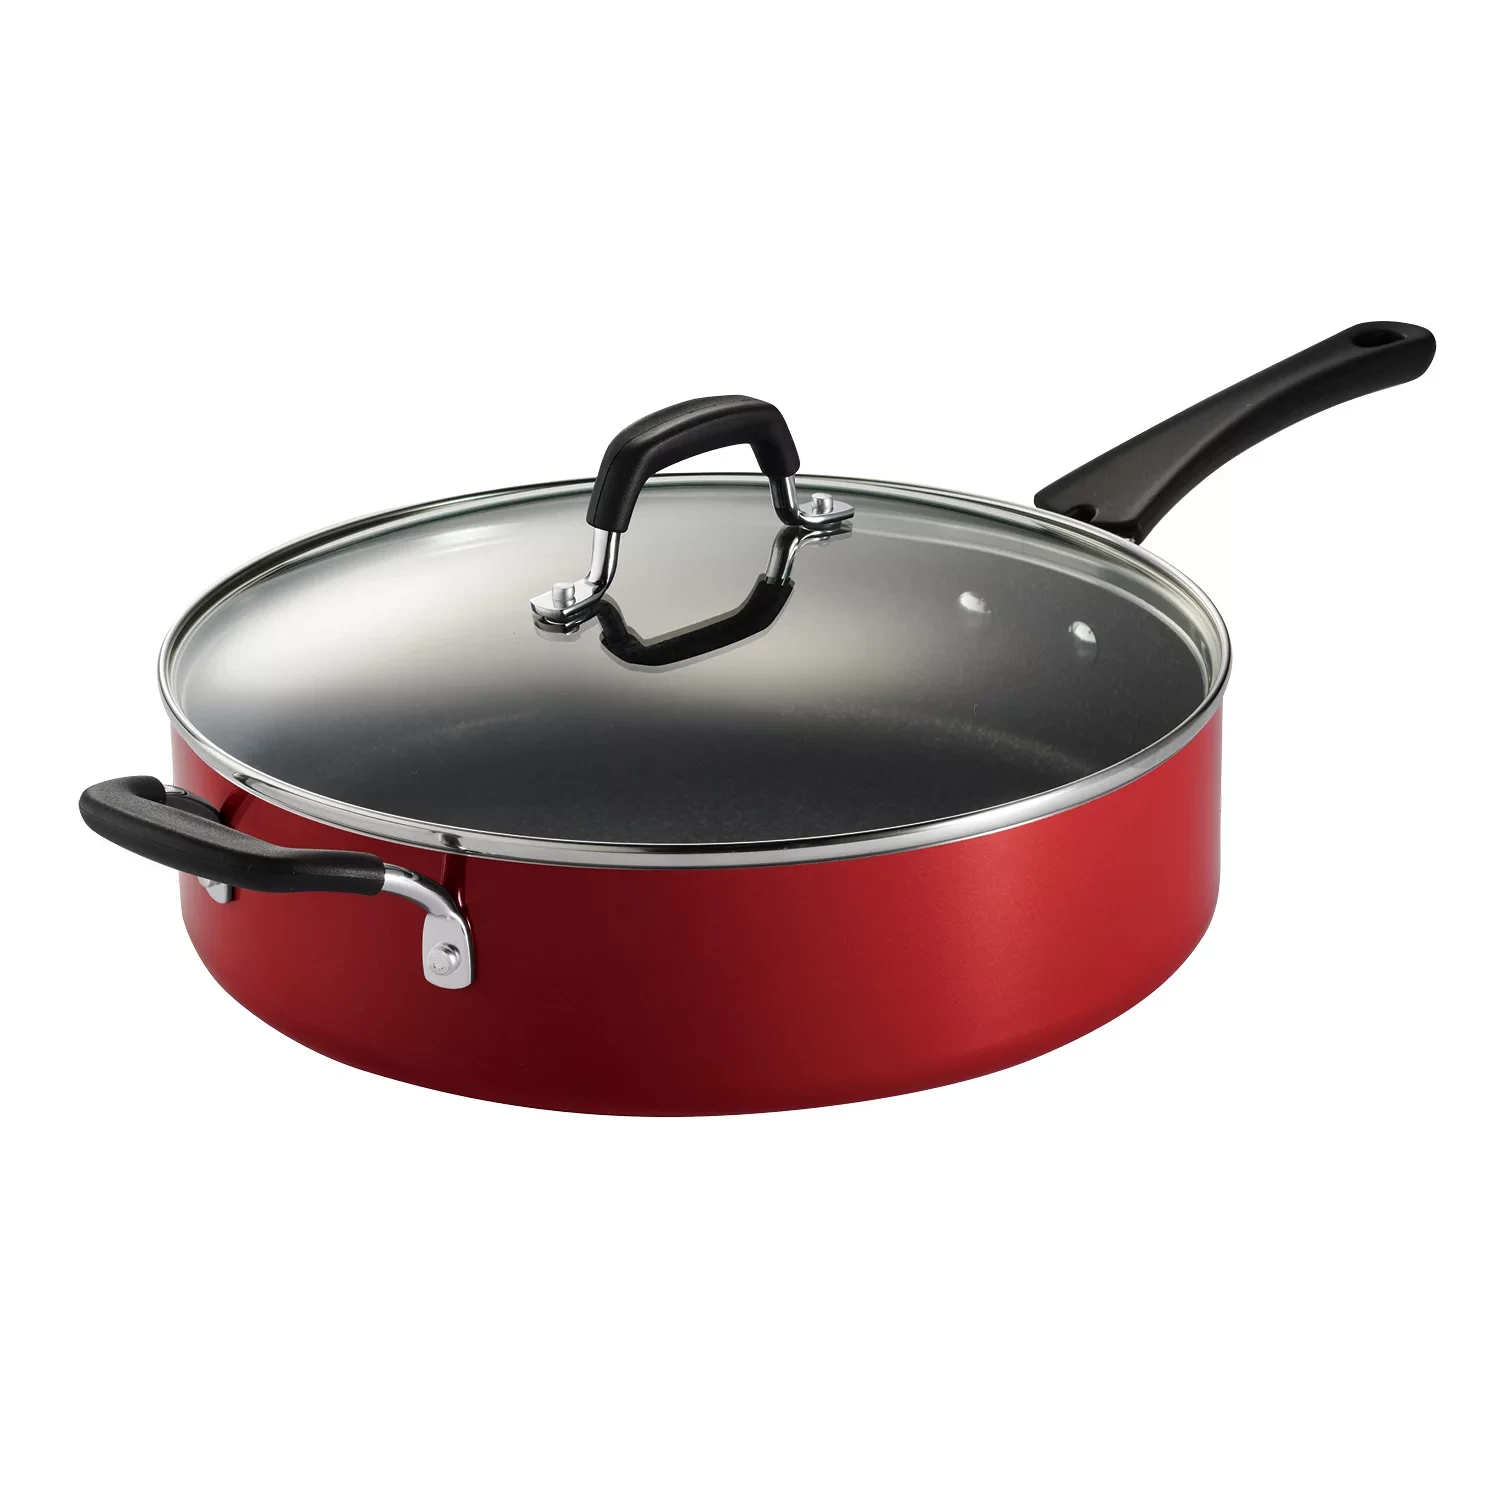 Tramontina 5.5 Qt Covered Nonstick Jumbo Cooker, Red